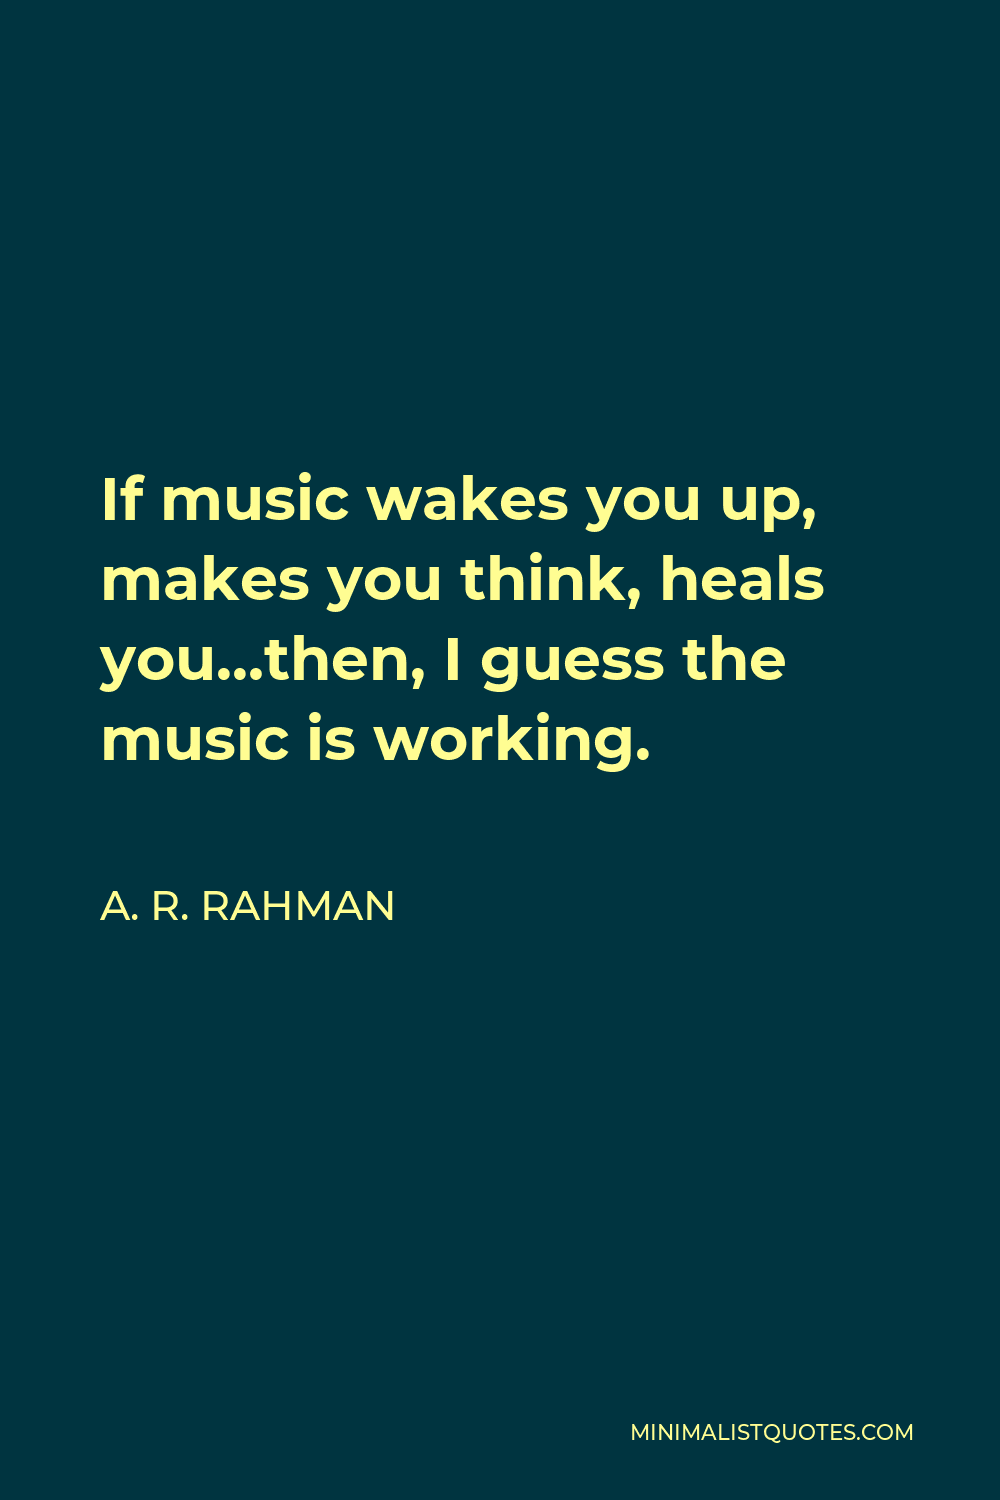 A. R. Rahman Quote - If music wakes you up, makes you think, heals you…then, I guess the music is working.